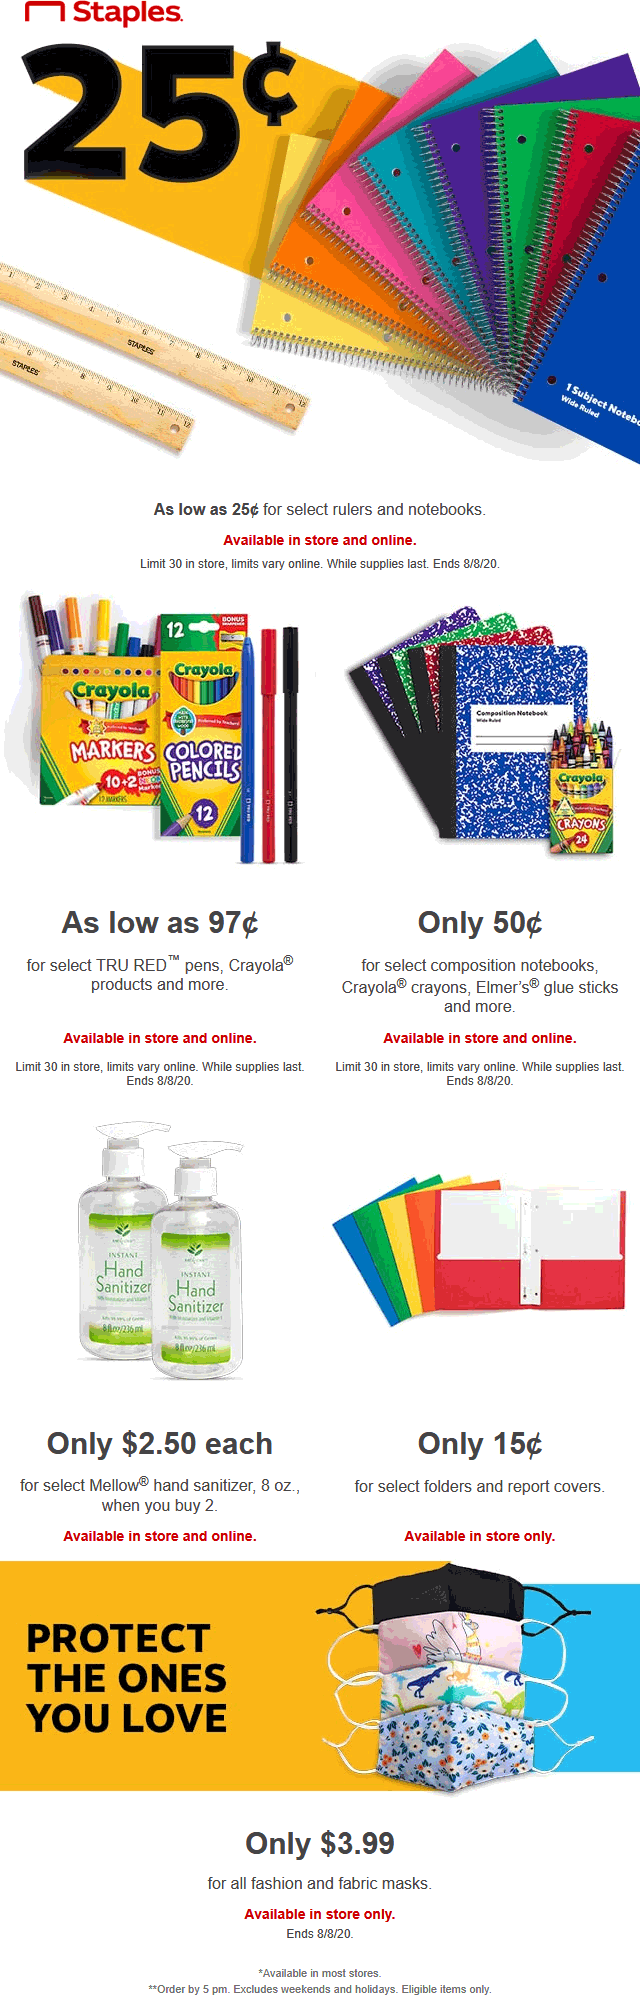 Staples stores Coupon  .25 cent back-to-school supplies deals at Staples & online #staples 